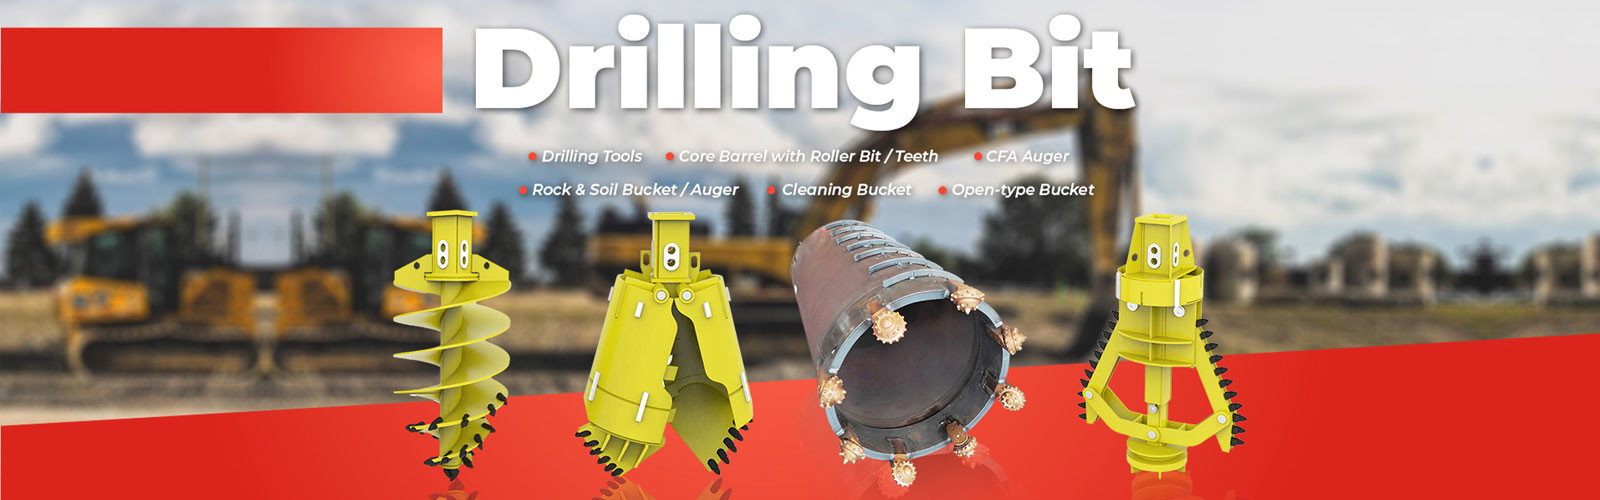 quality Drilling Kelly Bar factory